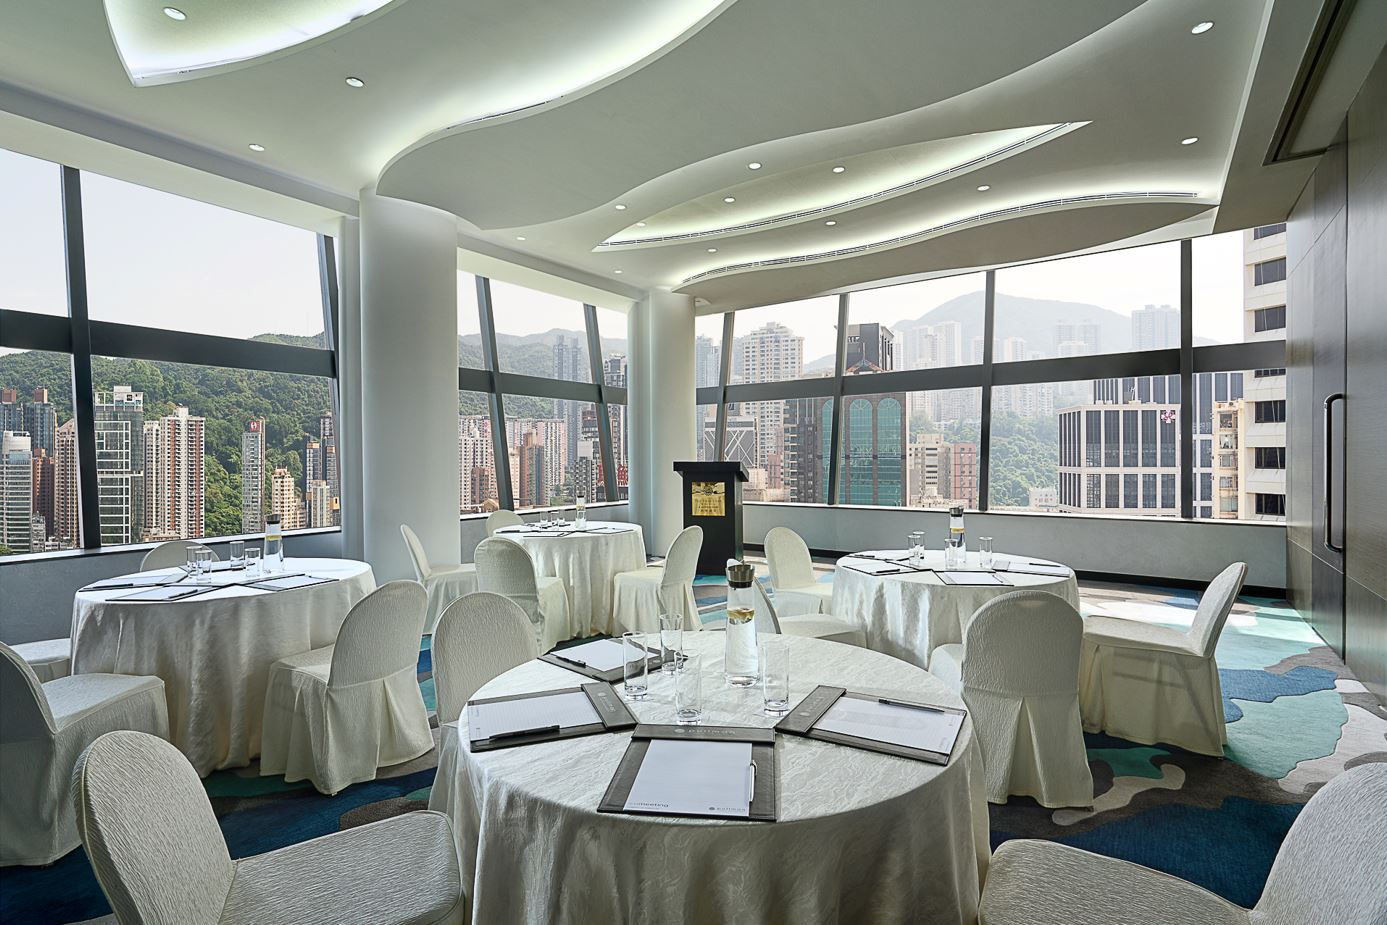 The Park Lane Room meeting set-up on the 27th floor of the Park Lane Hong Kong hotel